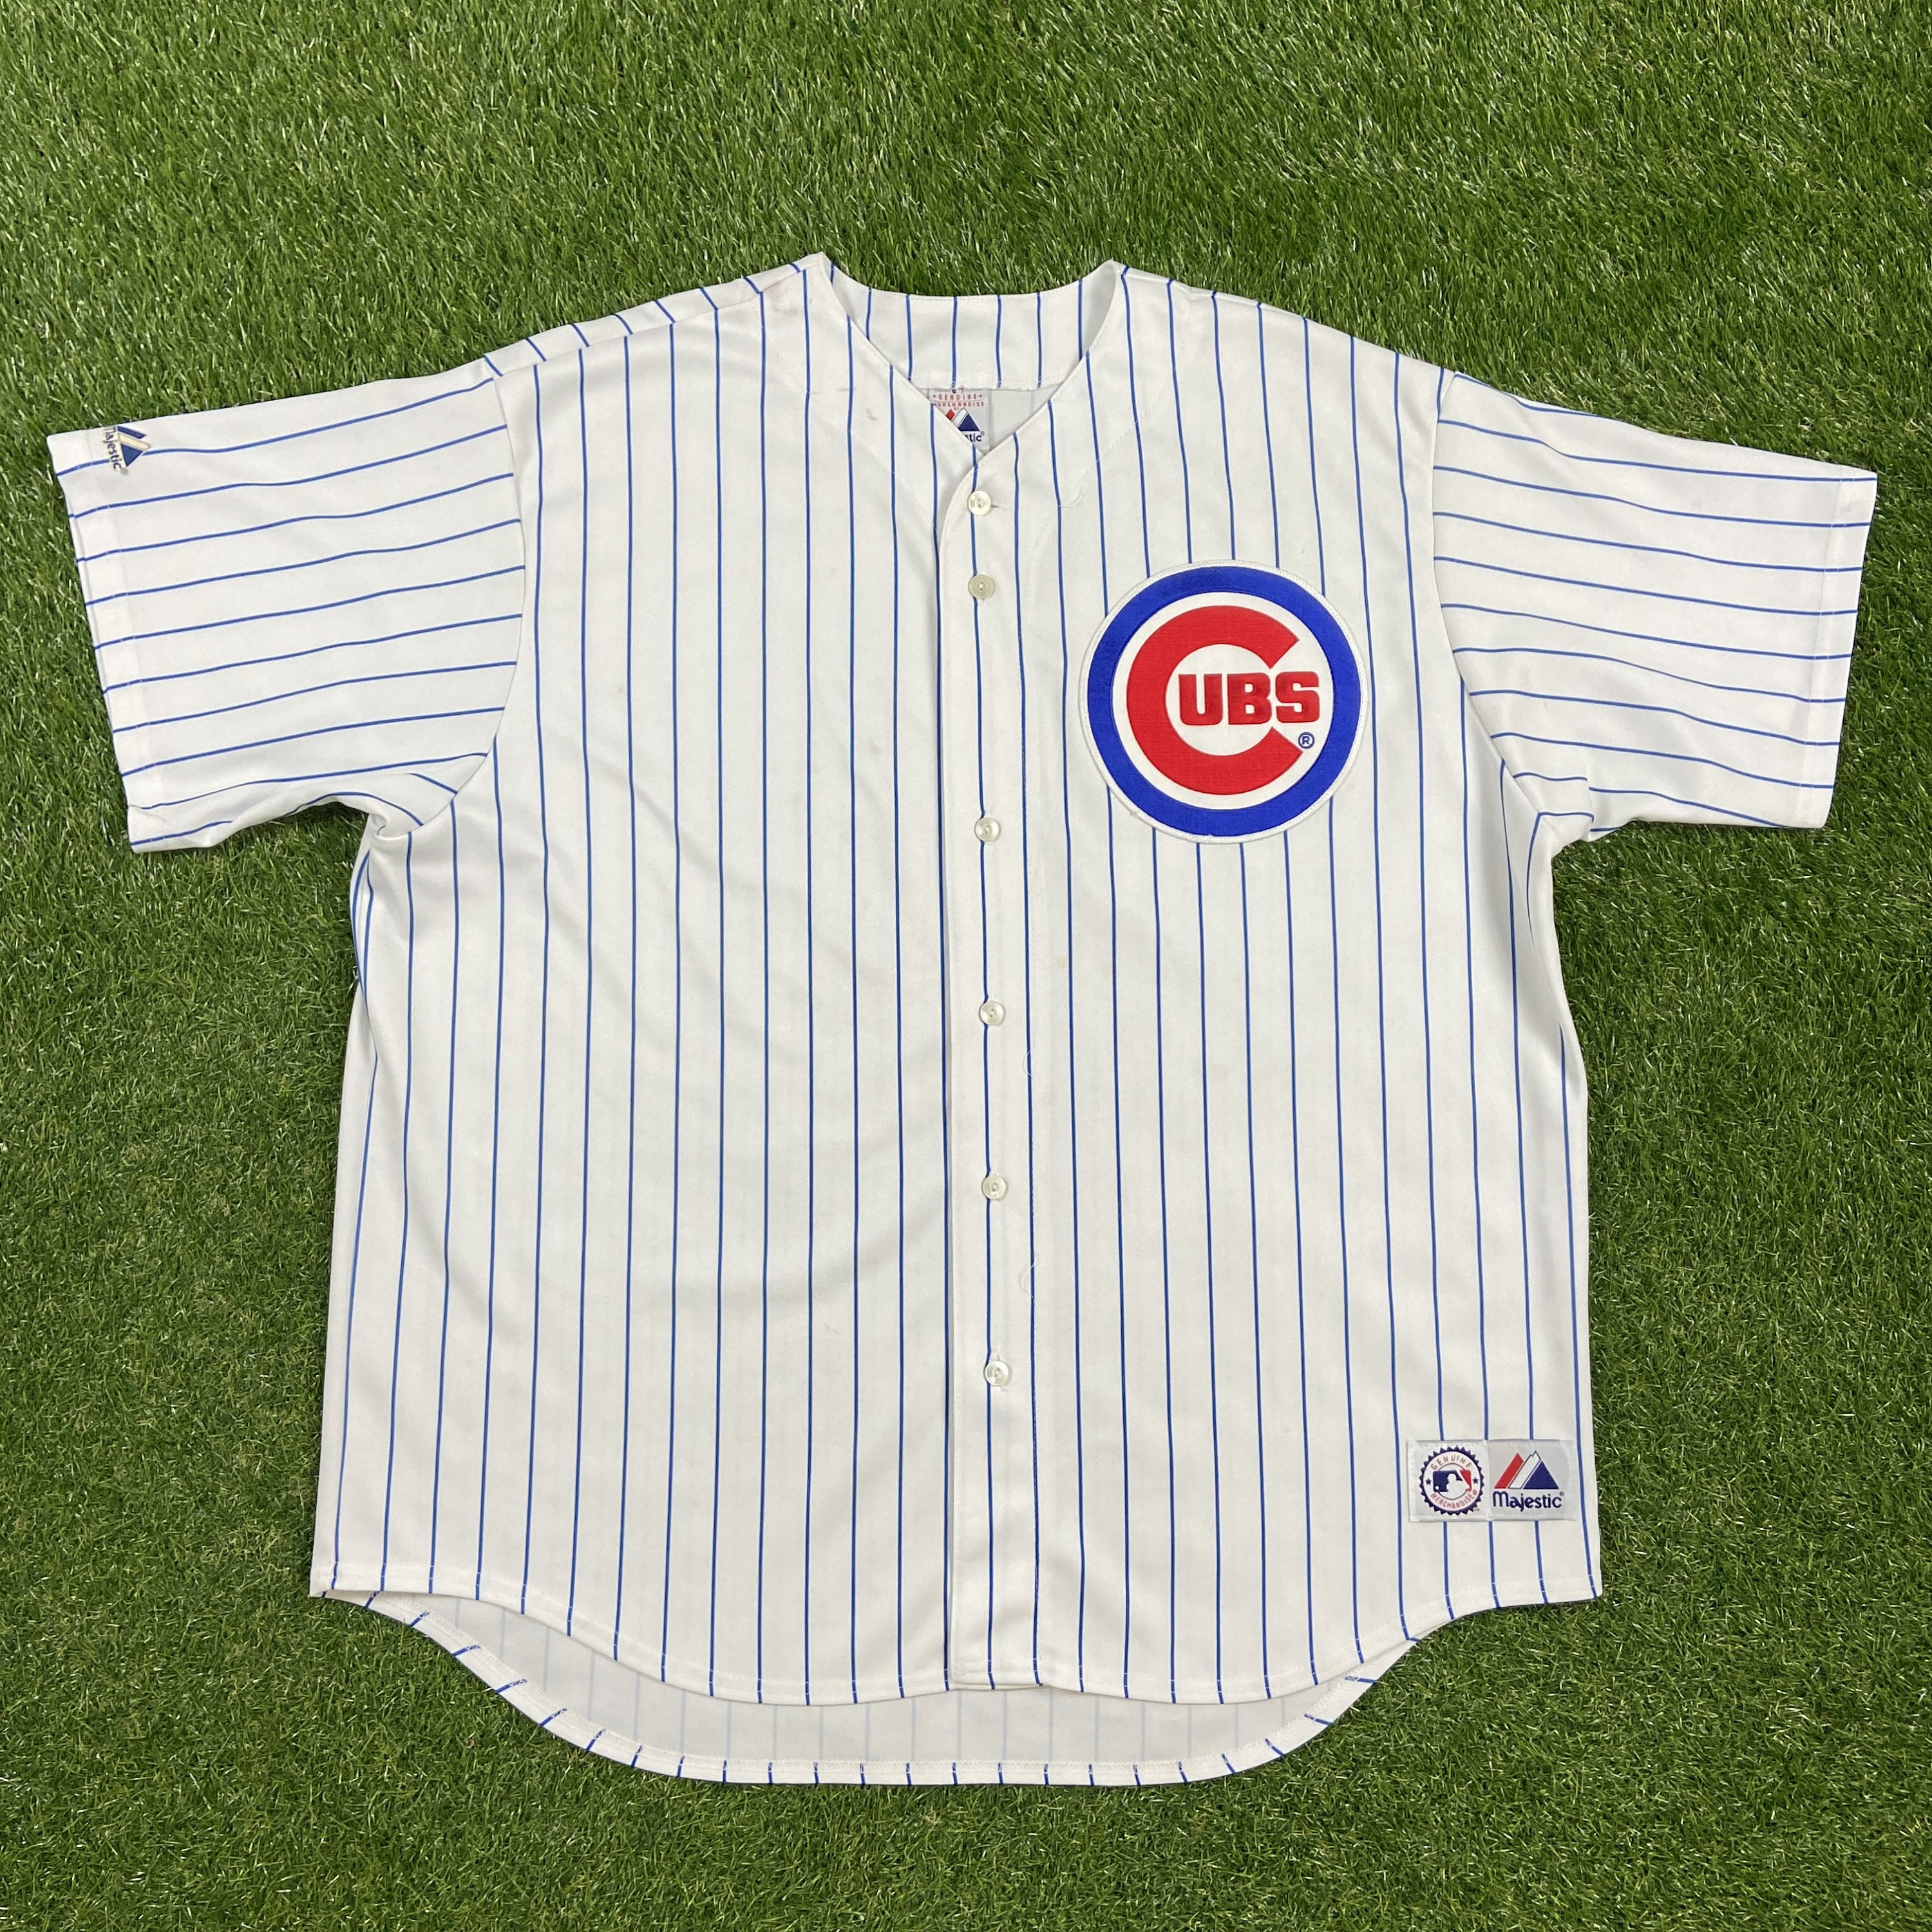 cubs old jerseys